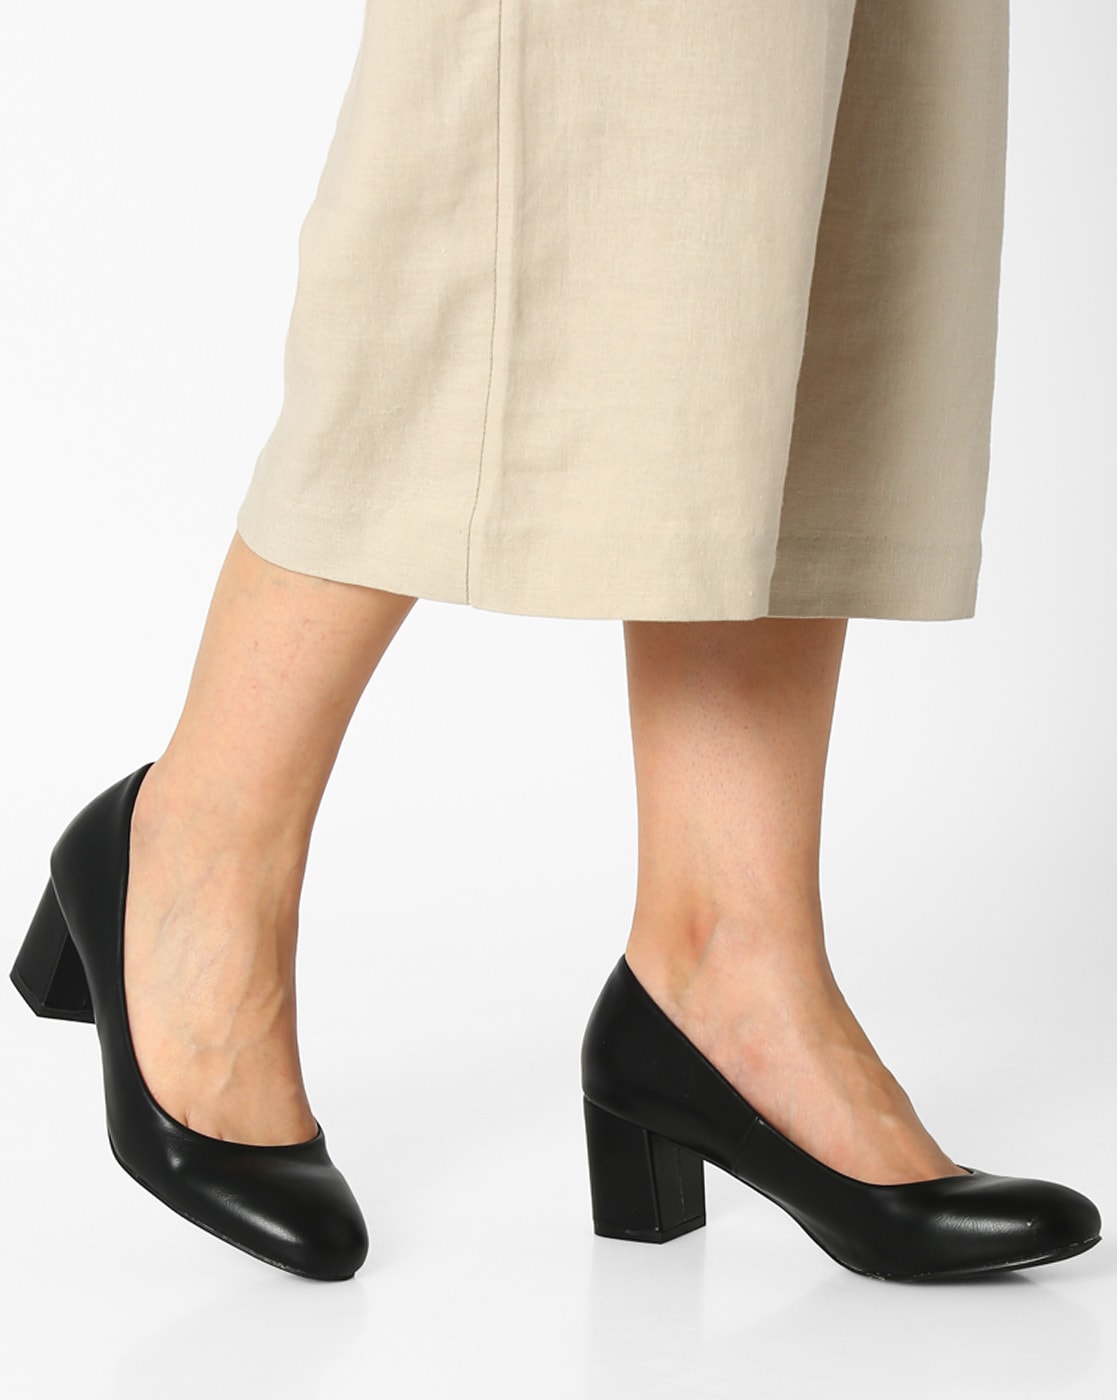 Dress Shoes for Women: Elevate Your Look | Ghazal